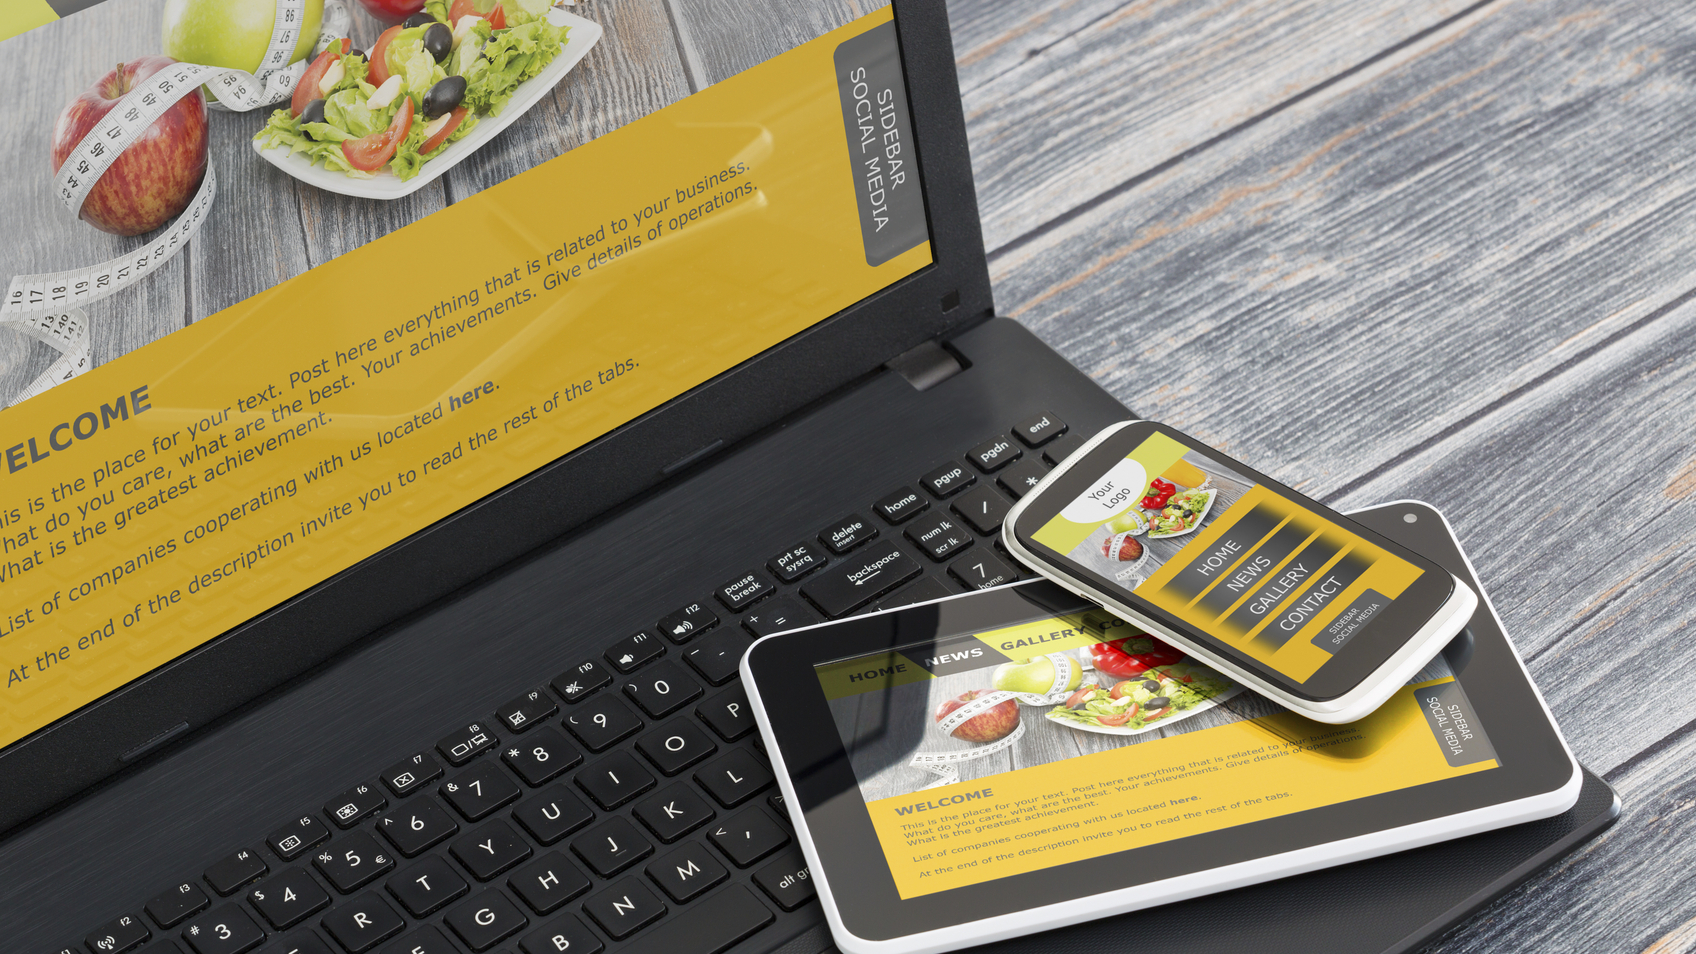 Responsive web design on mobile devices phone, laptop and tablet pc